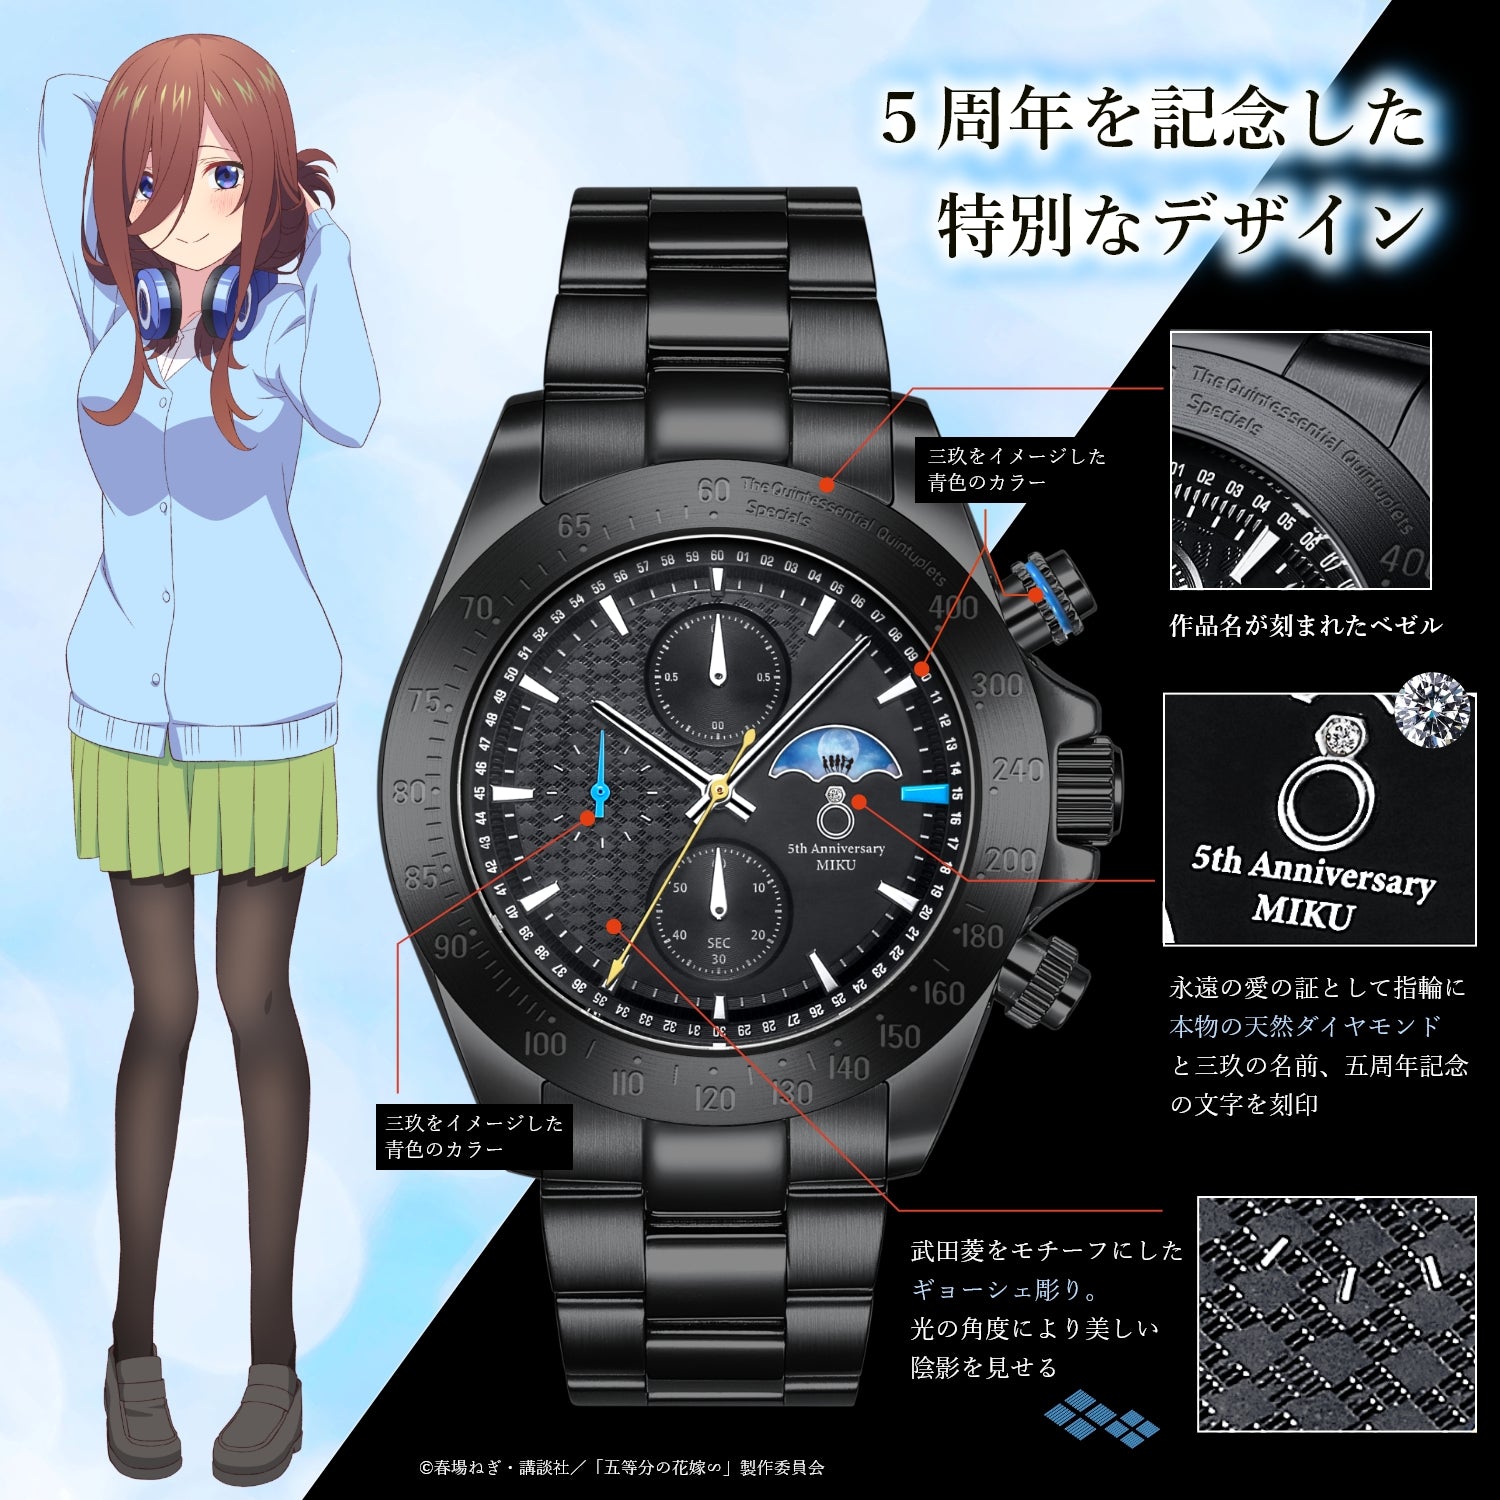 TV SPECIAL ANIME“THE QUINTESSENTIAL QUINTUPLETS” 5TH ANNIVERSARY SUN & MOON CHRONOGRAPH WATCHES| MIKU NAKANO